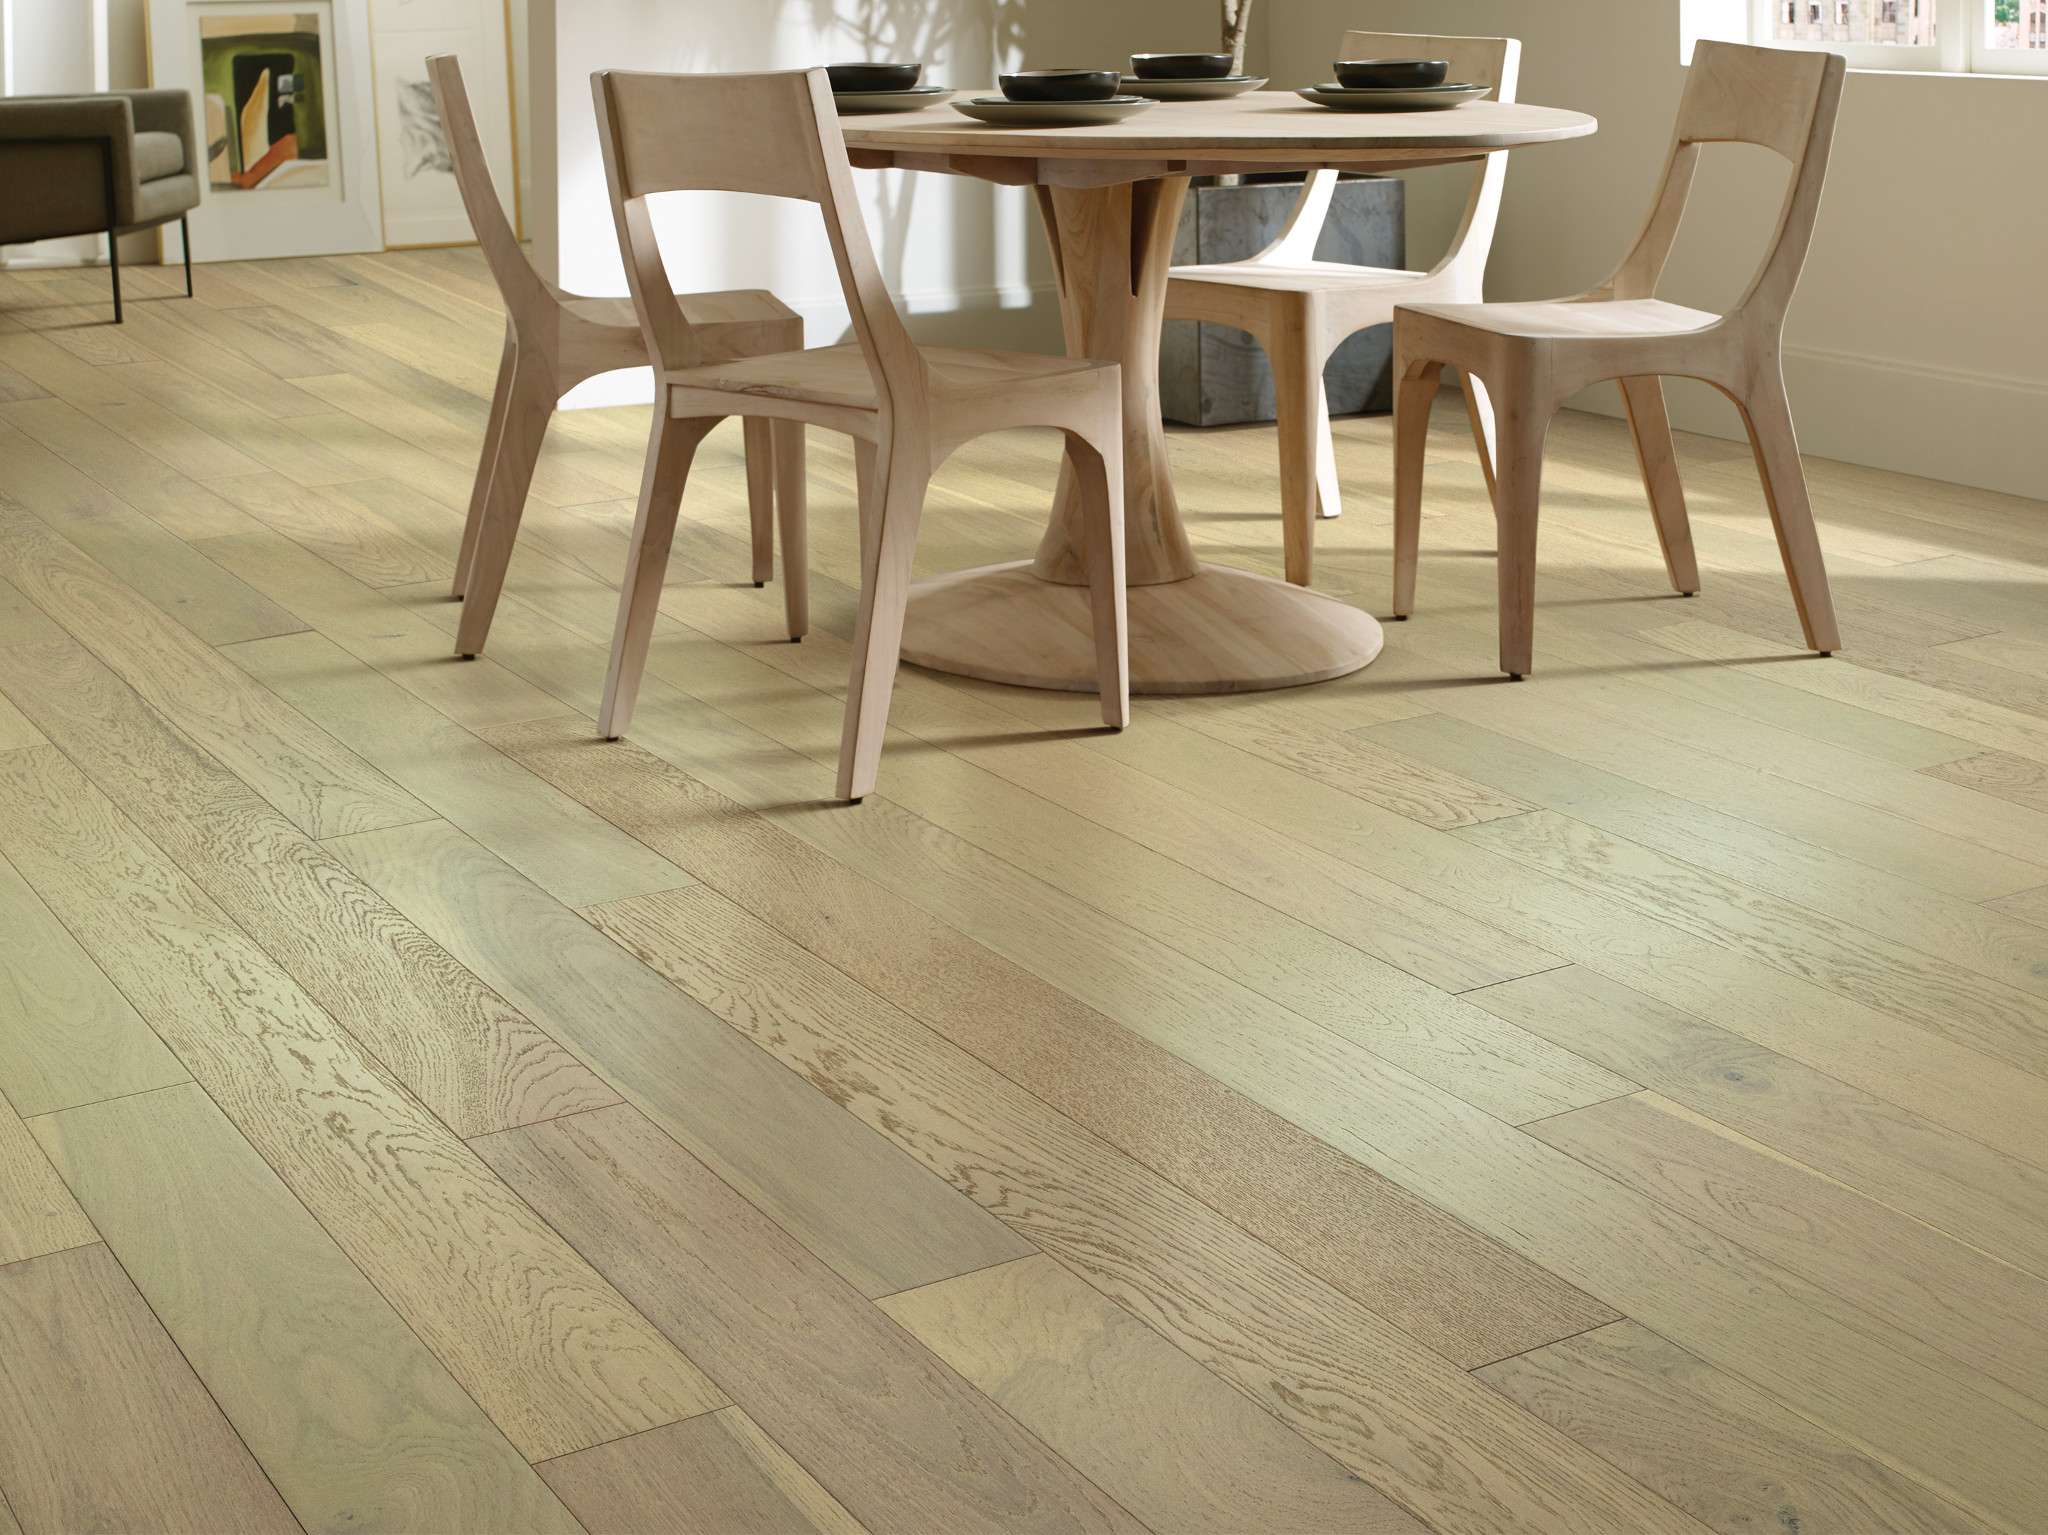 Empire Oak Plank Sw583 Carnegie, How Much Does Empire Laminate Flooring Cost